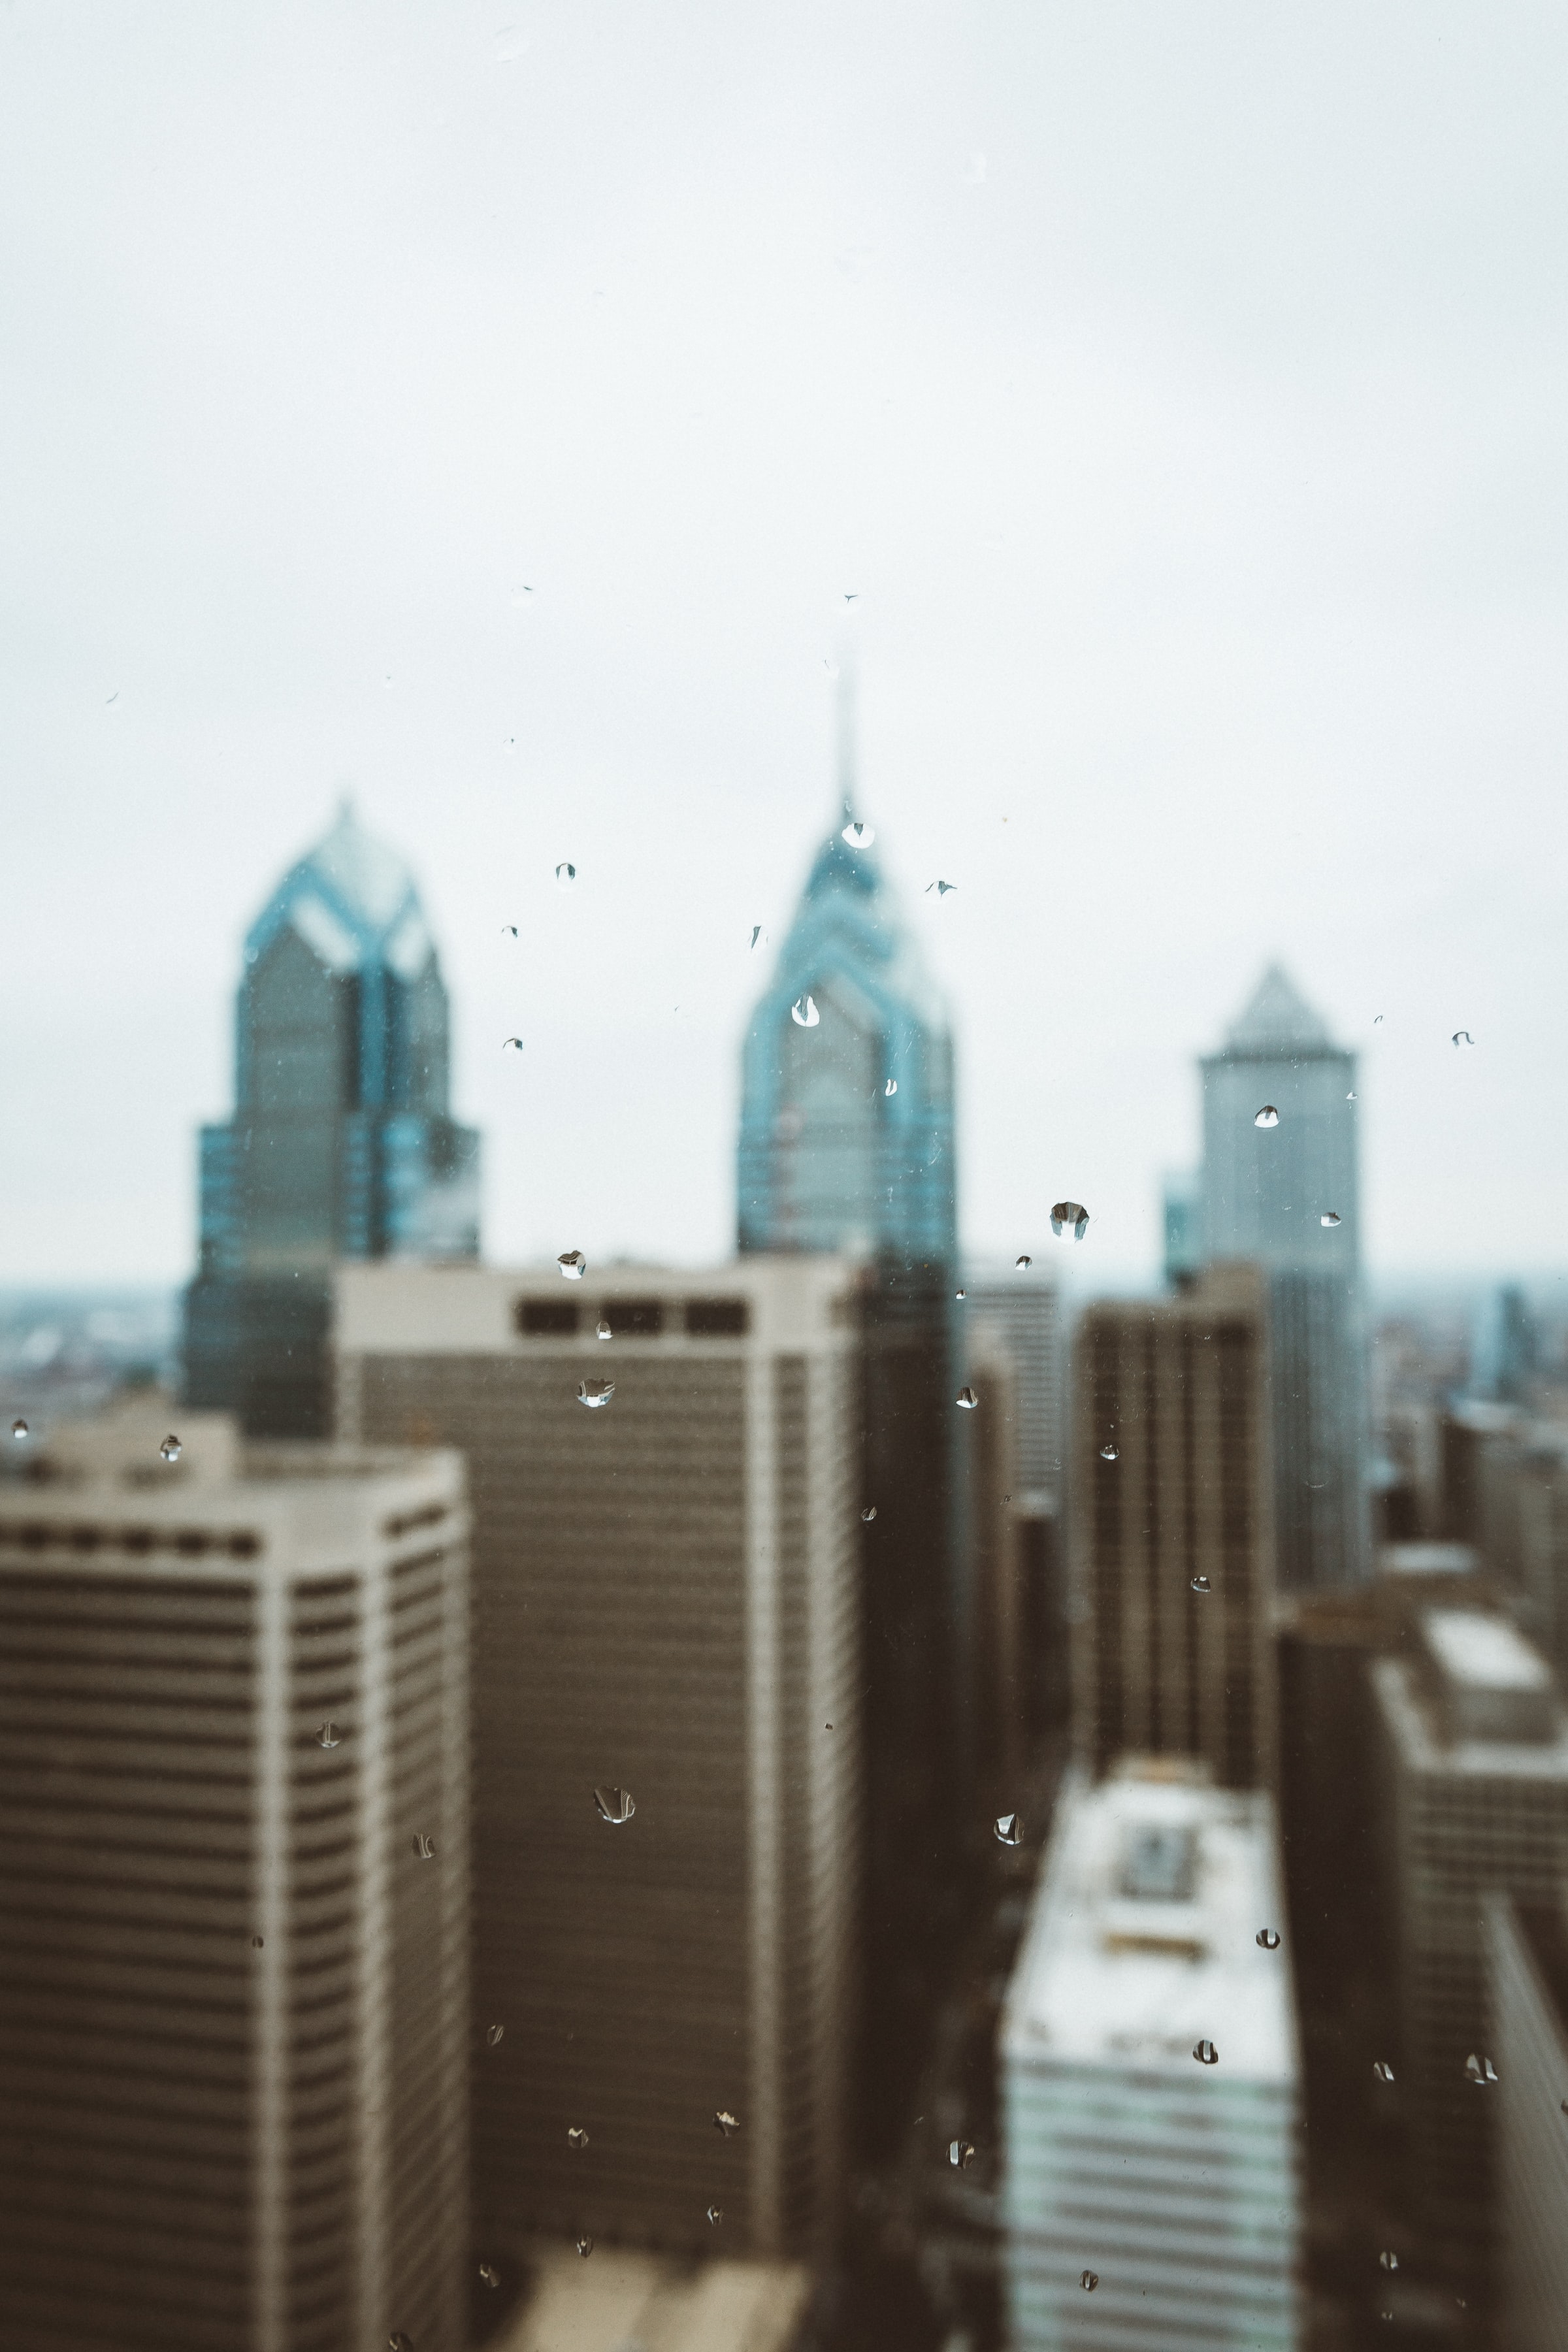 drops, building, miscellanea, miscellaneous, blur, smooth, skyscrapers, tower, towers